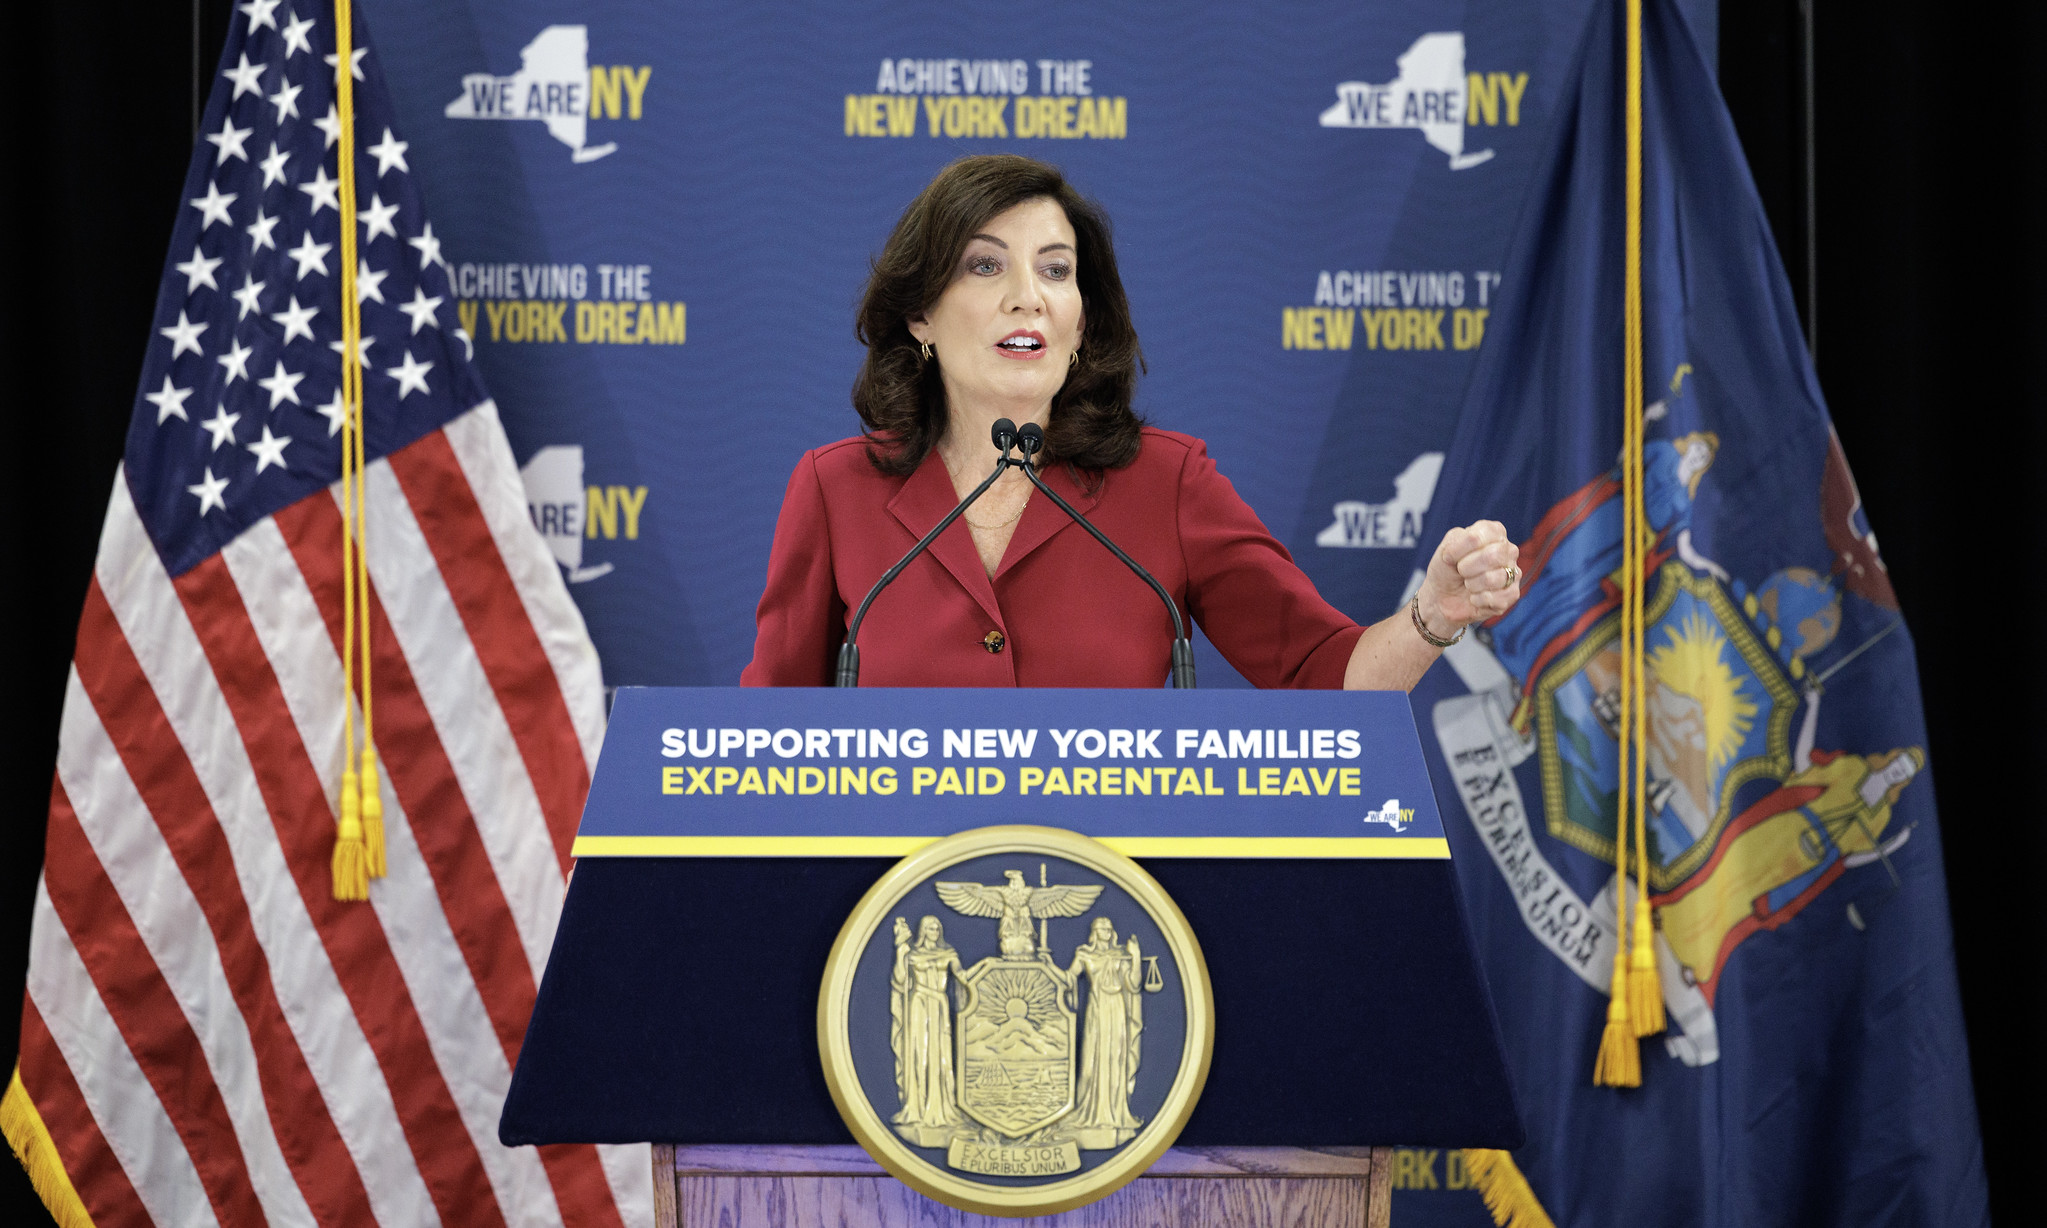 Governor Hochul Announces Expansion of FullyPaid Parental Leave